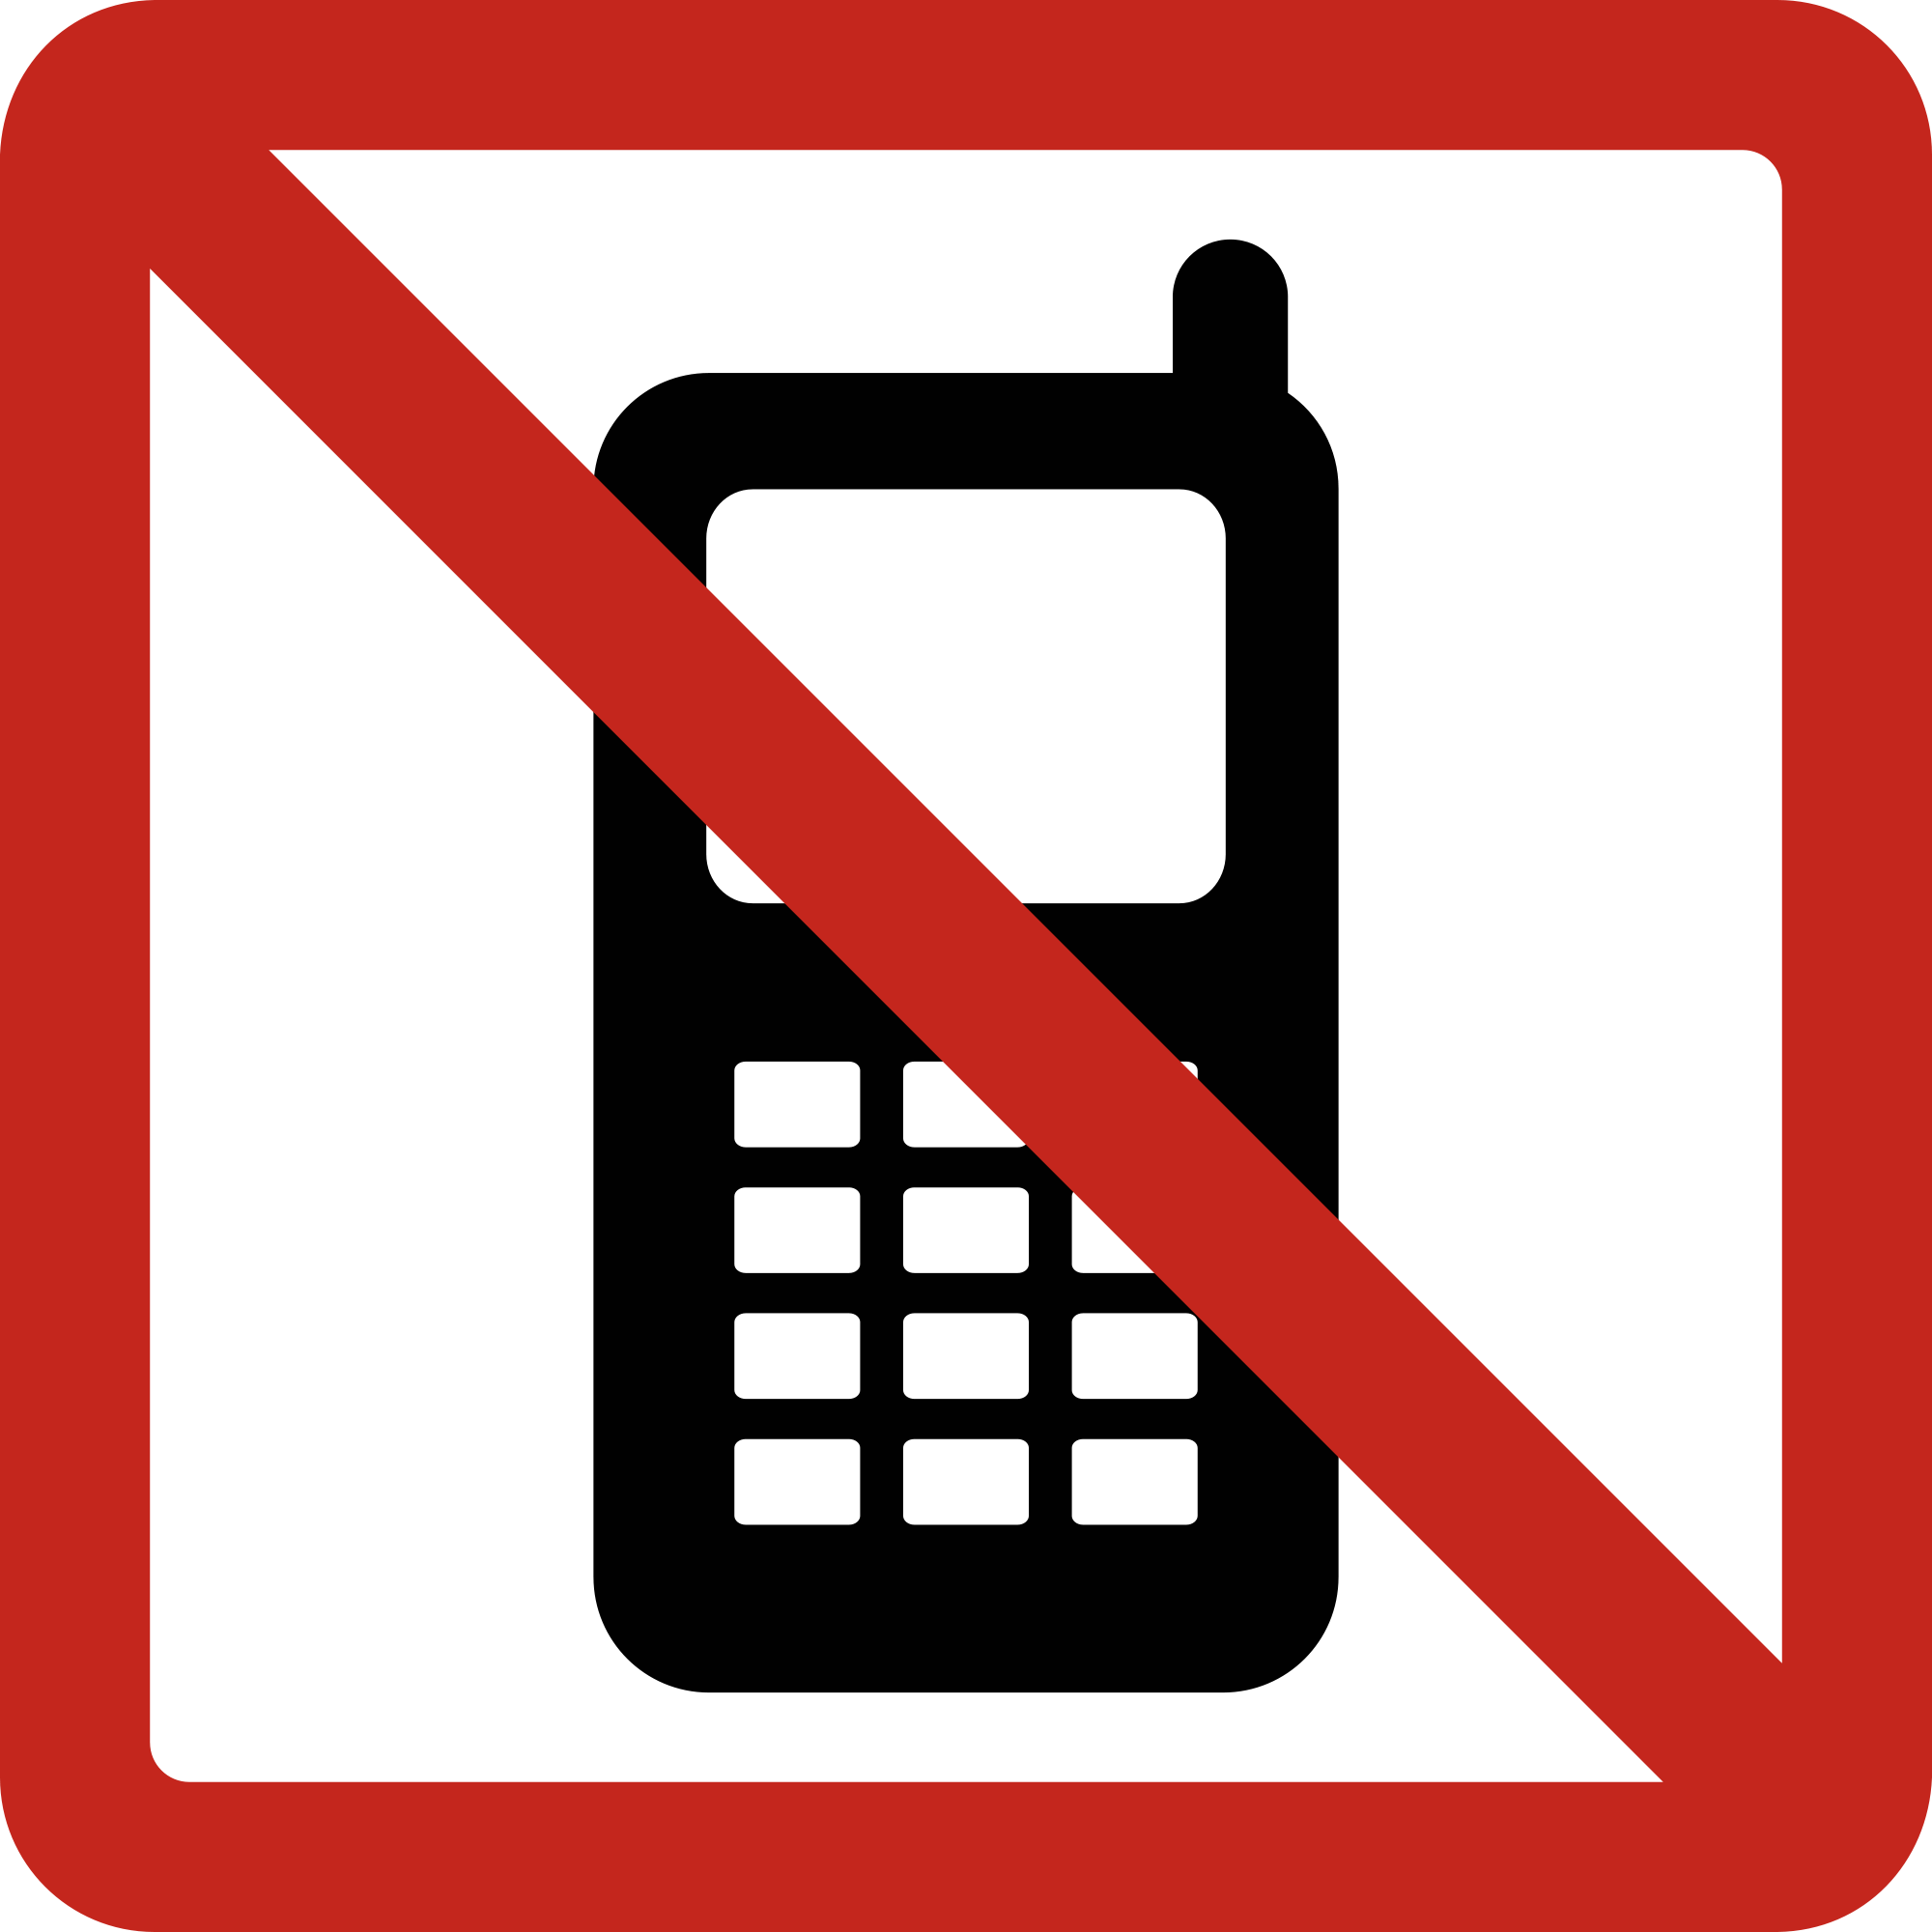 File:No cellphone sign 45px.jpg